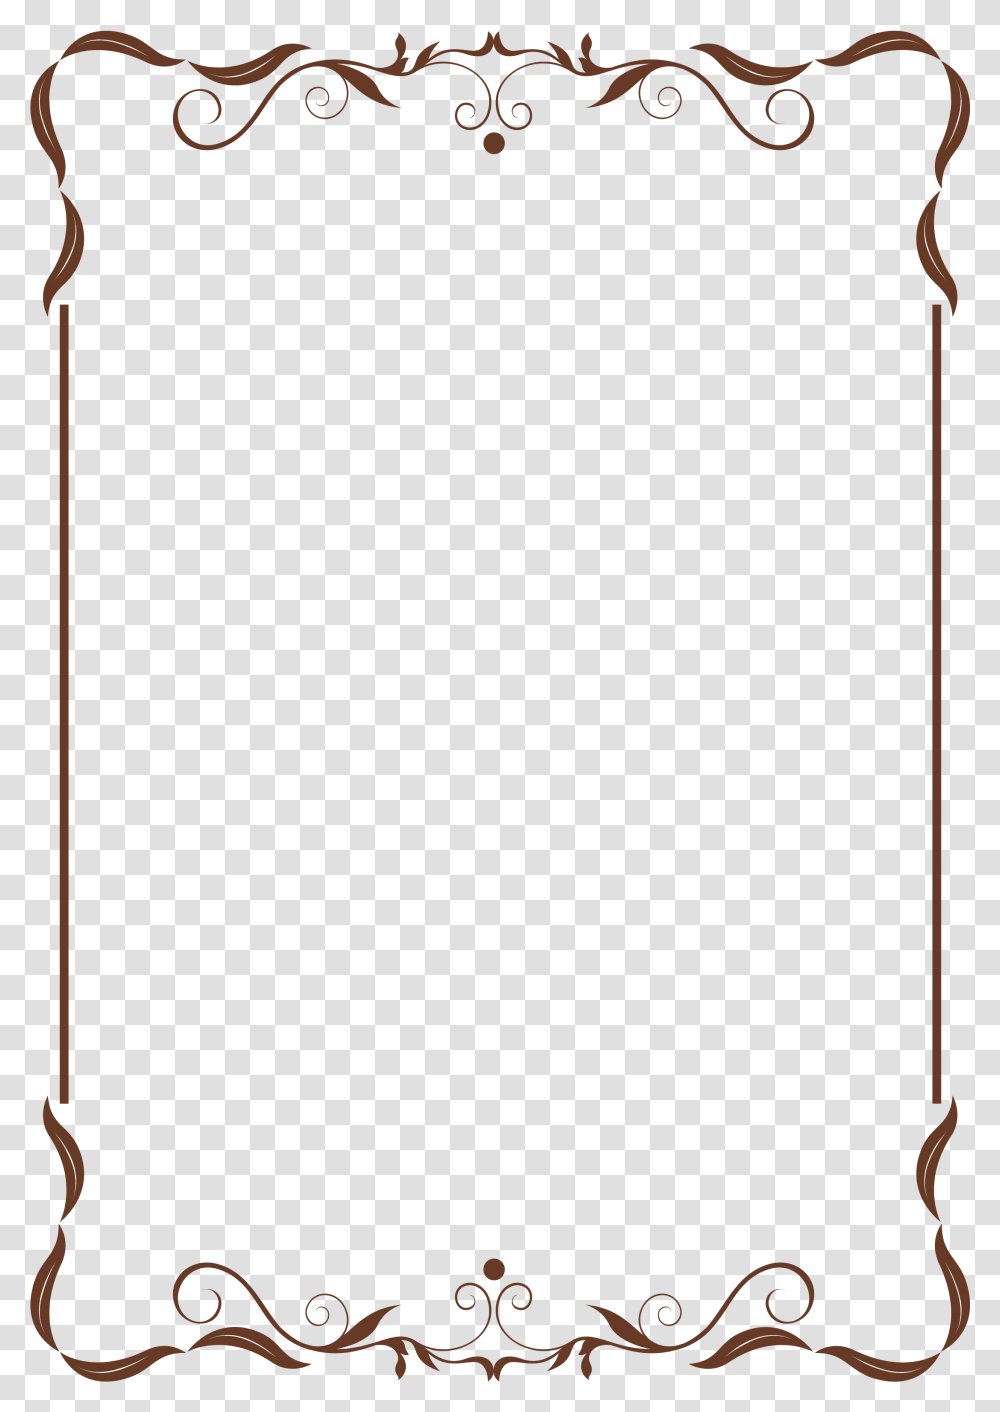 Simple Elegant Classy Border Design Cartoons Frame Black And White, Arrow, Weapon, Weaponry Transparent Png